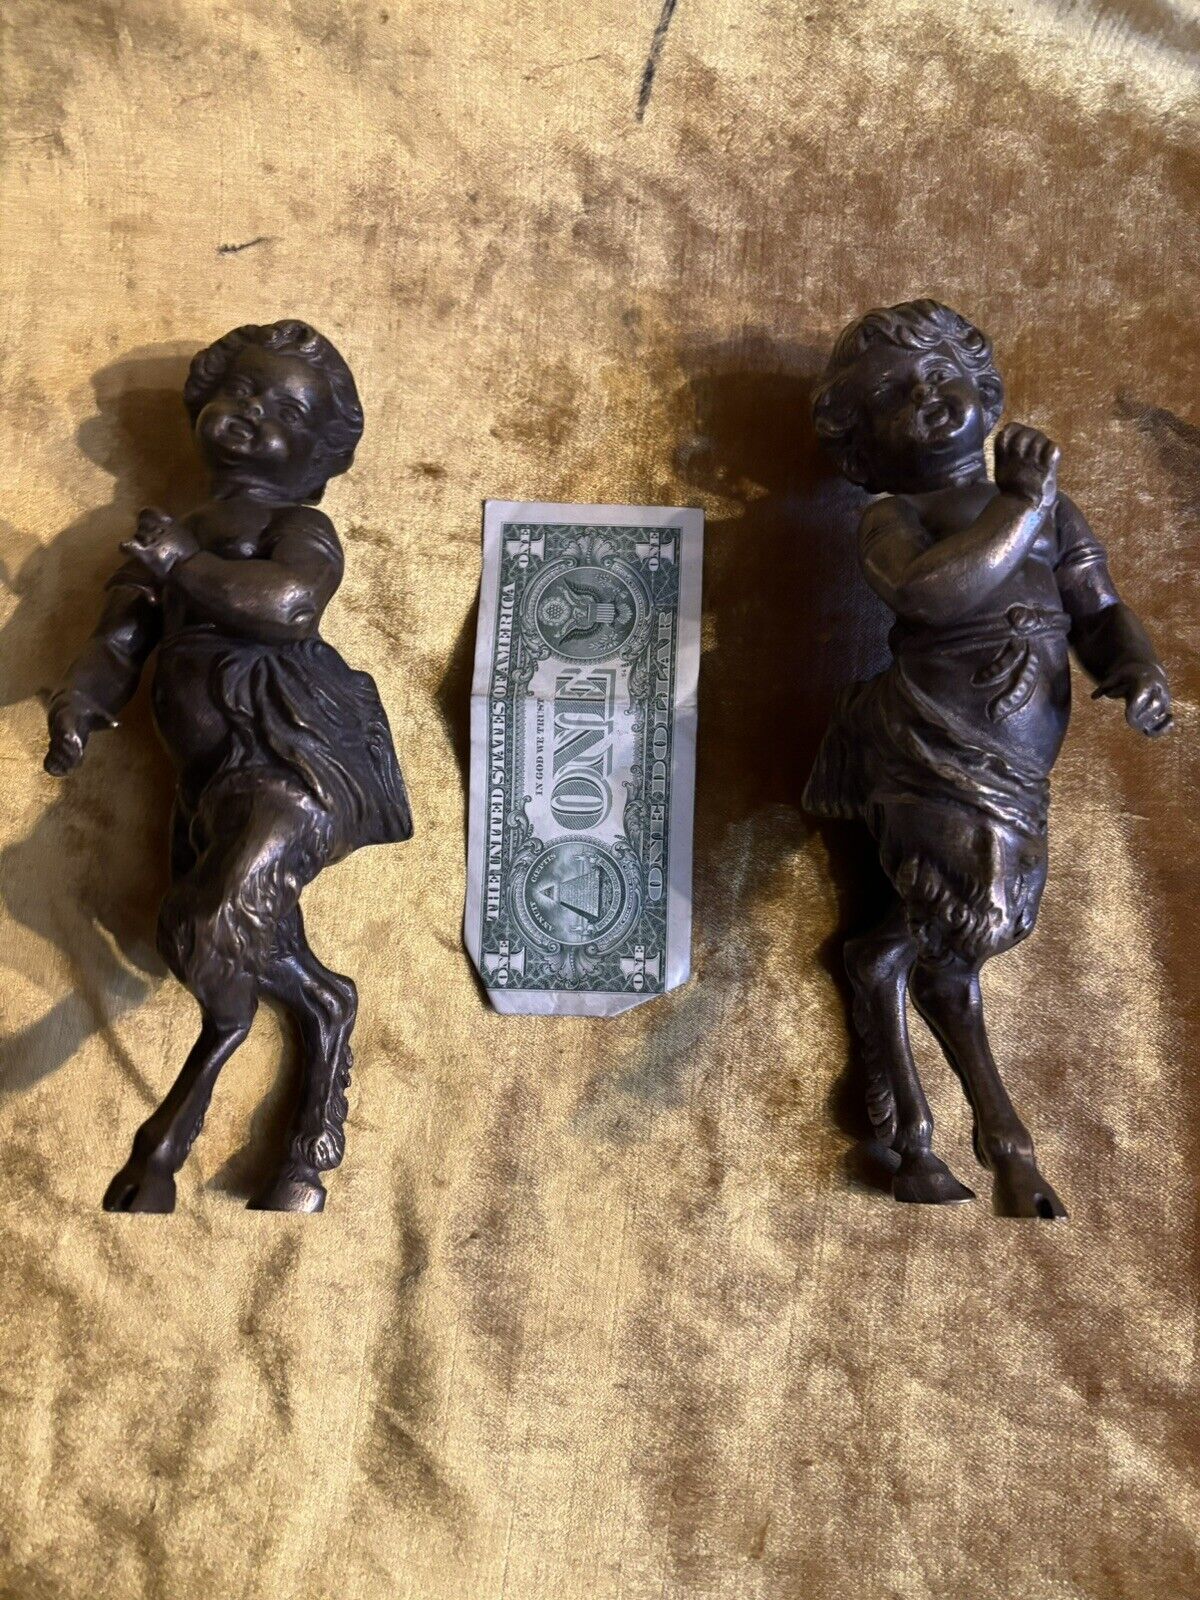 Antique Bronze Satyrs Pair Of The Putty’s Occult Paganism Oddities Figurines 